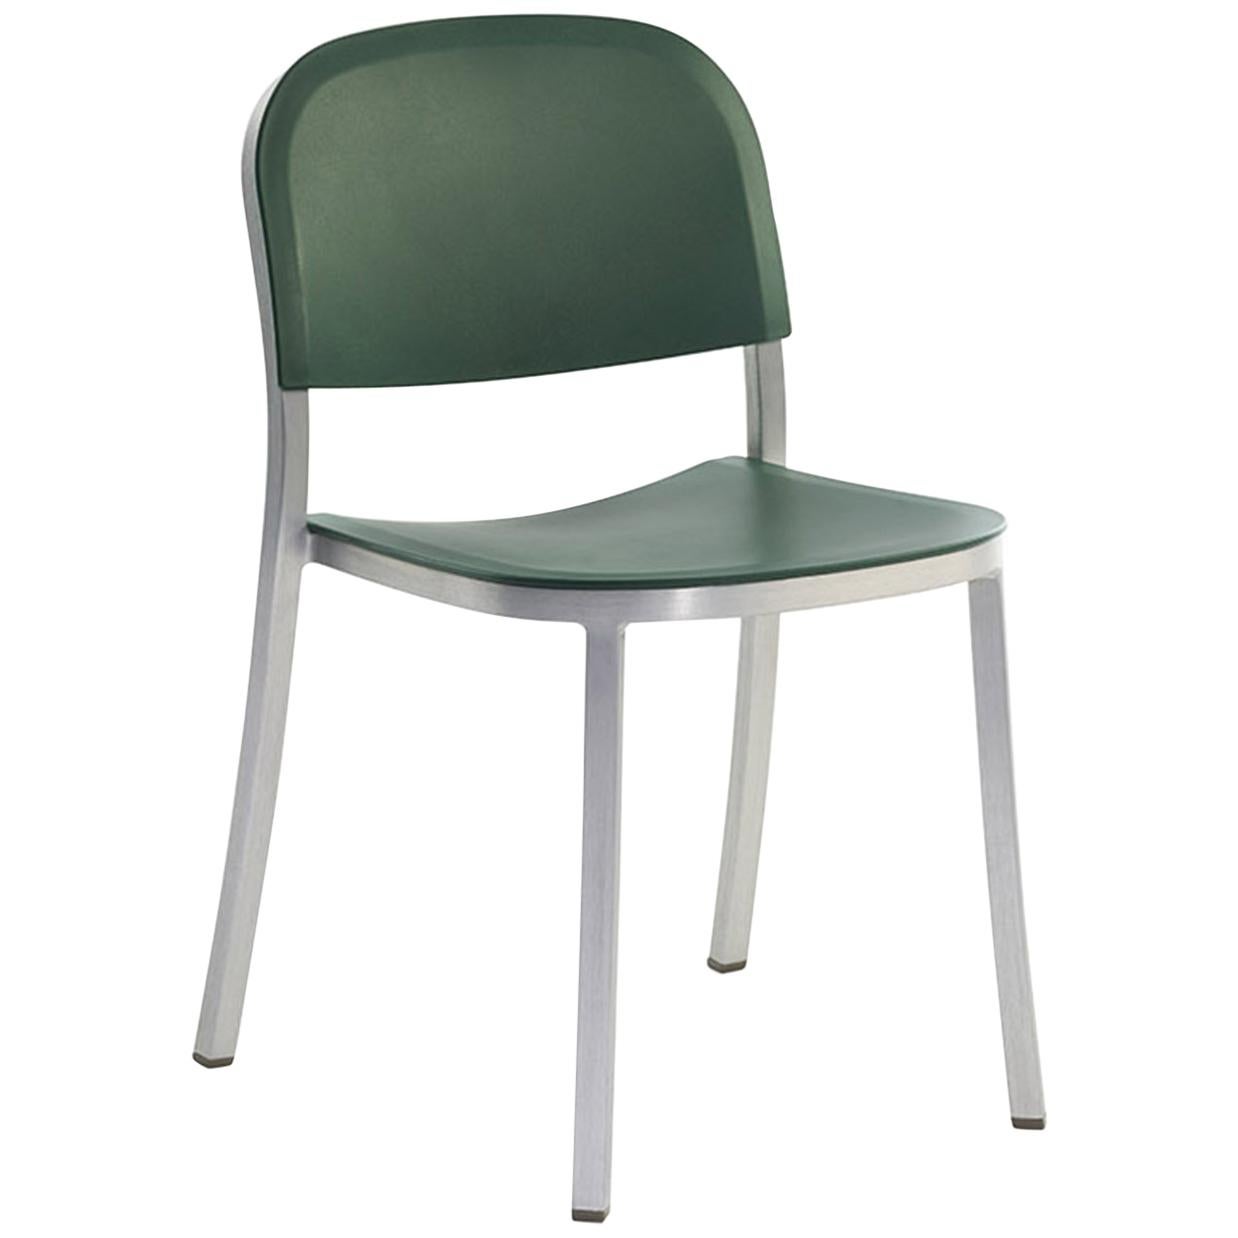 Emeco 1 Inch Stacking Chair in Brushed Aluminum and Green by Jasper Morrison